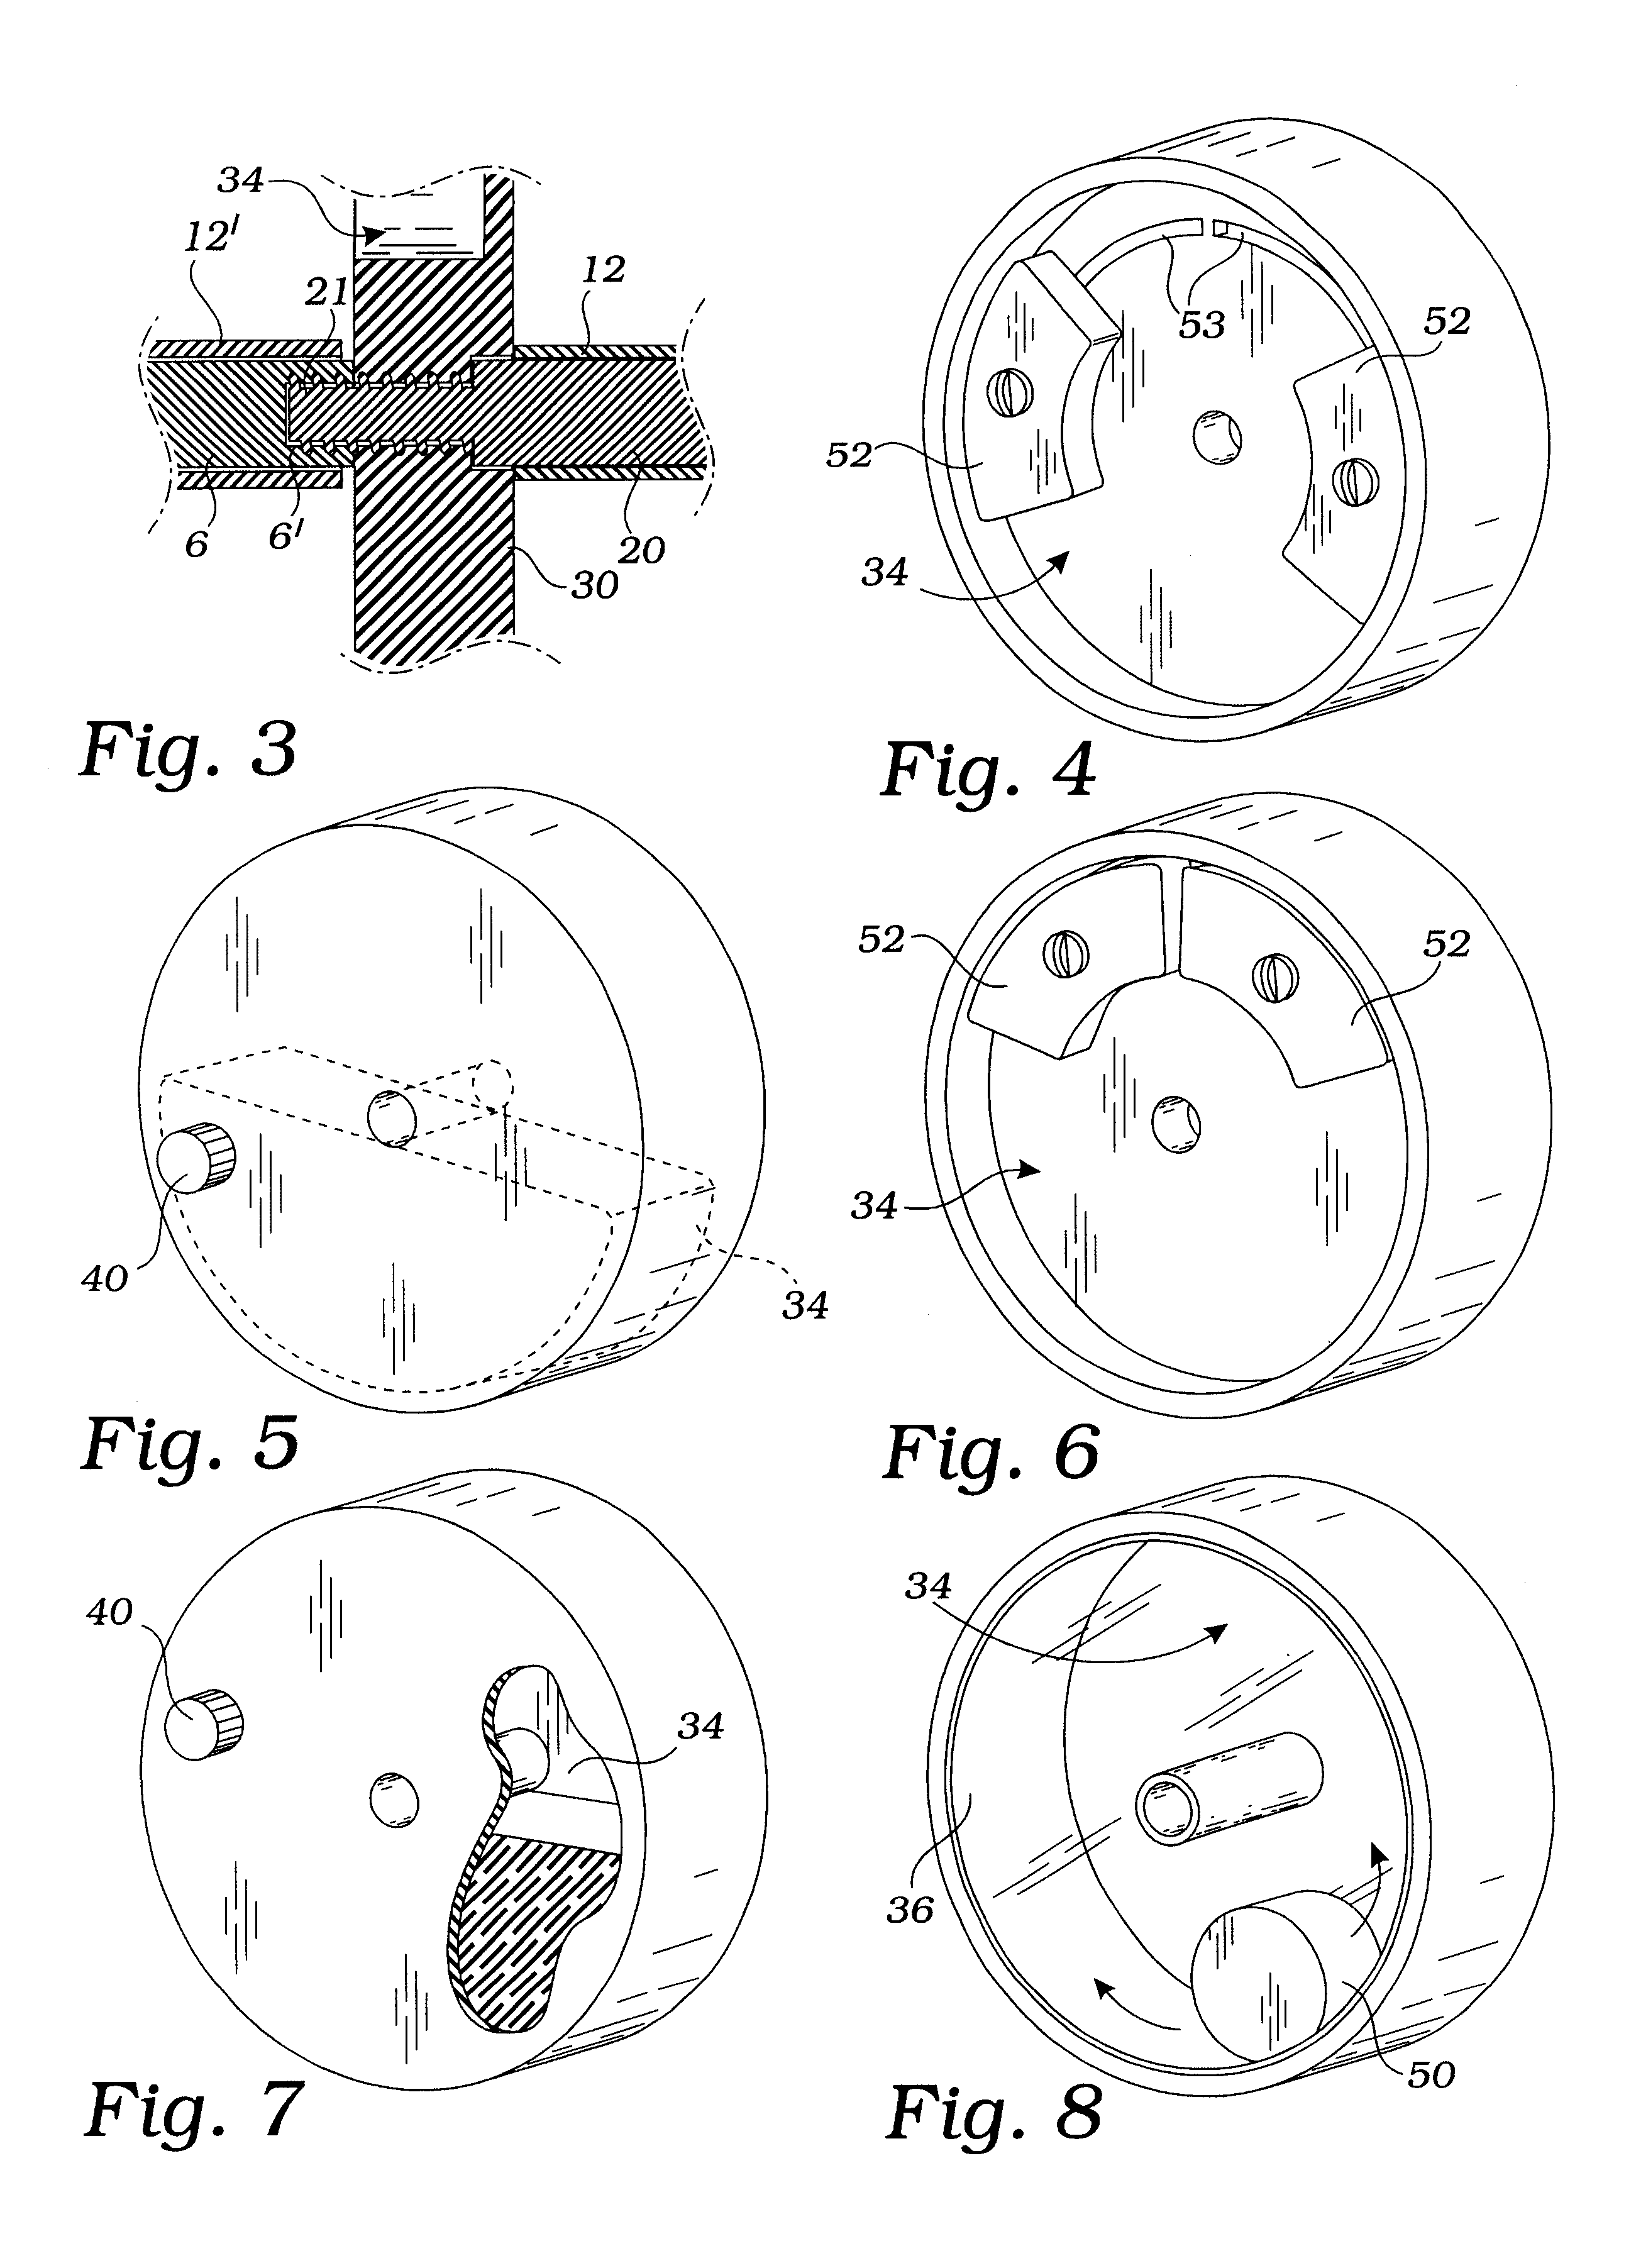 Specialty weight training apparatus and method